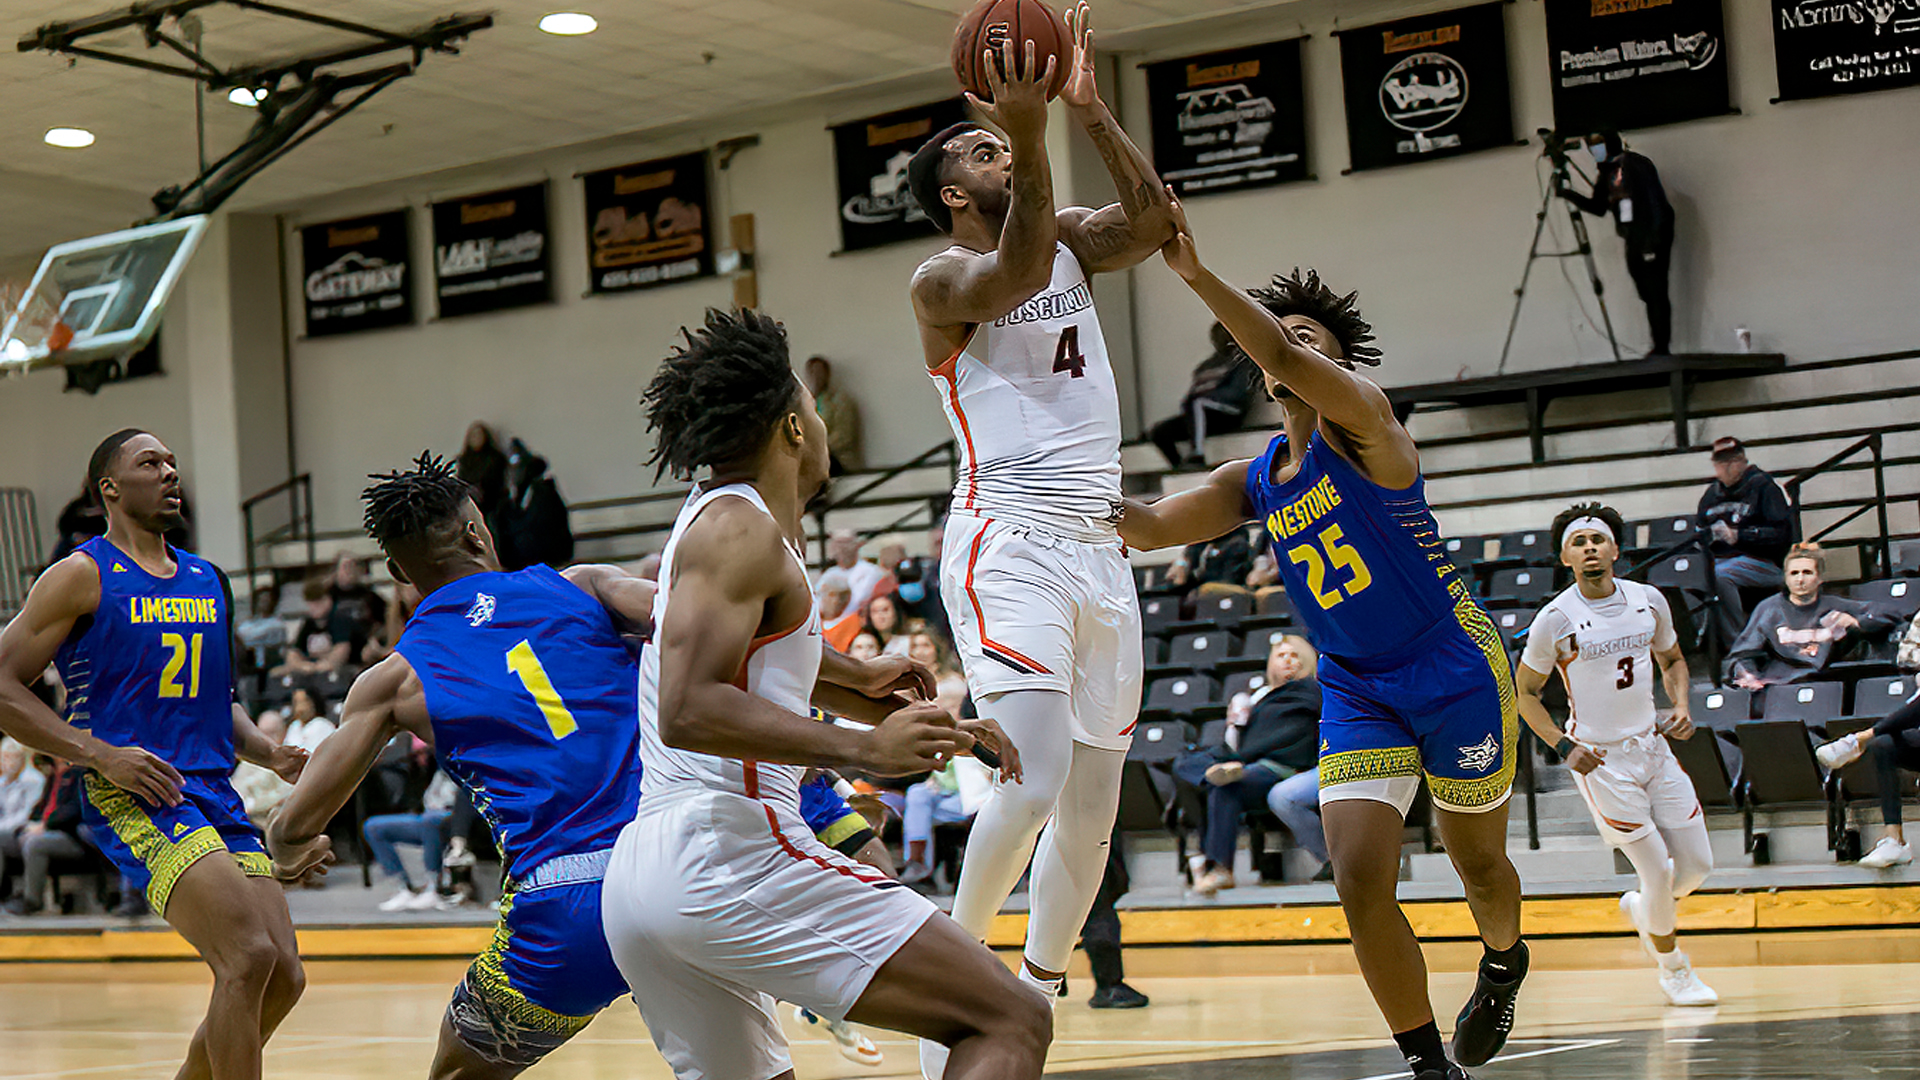 Pioneers clinch SAC quarterfinal home game with 74-58 win at Limestone